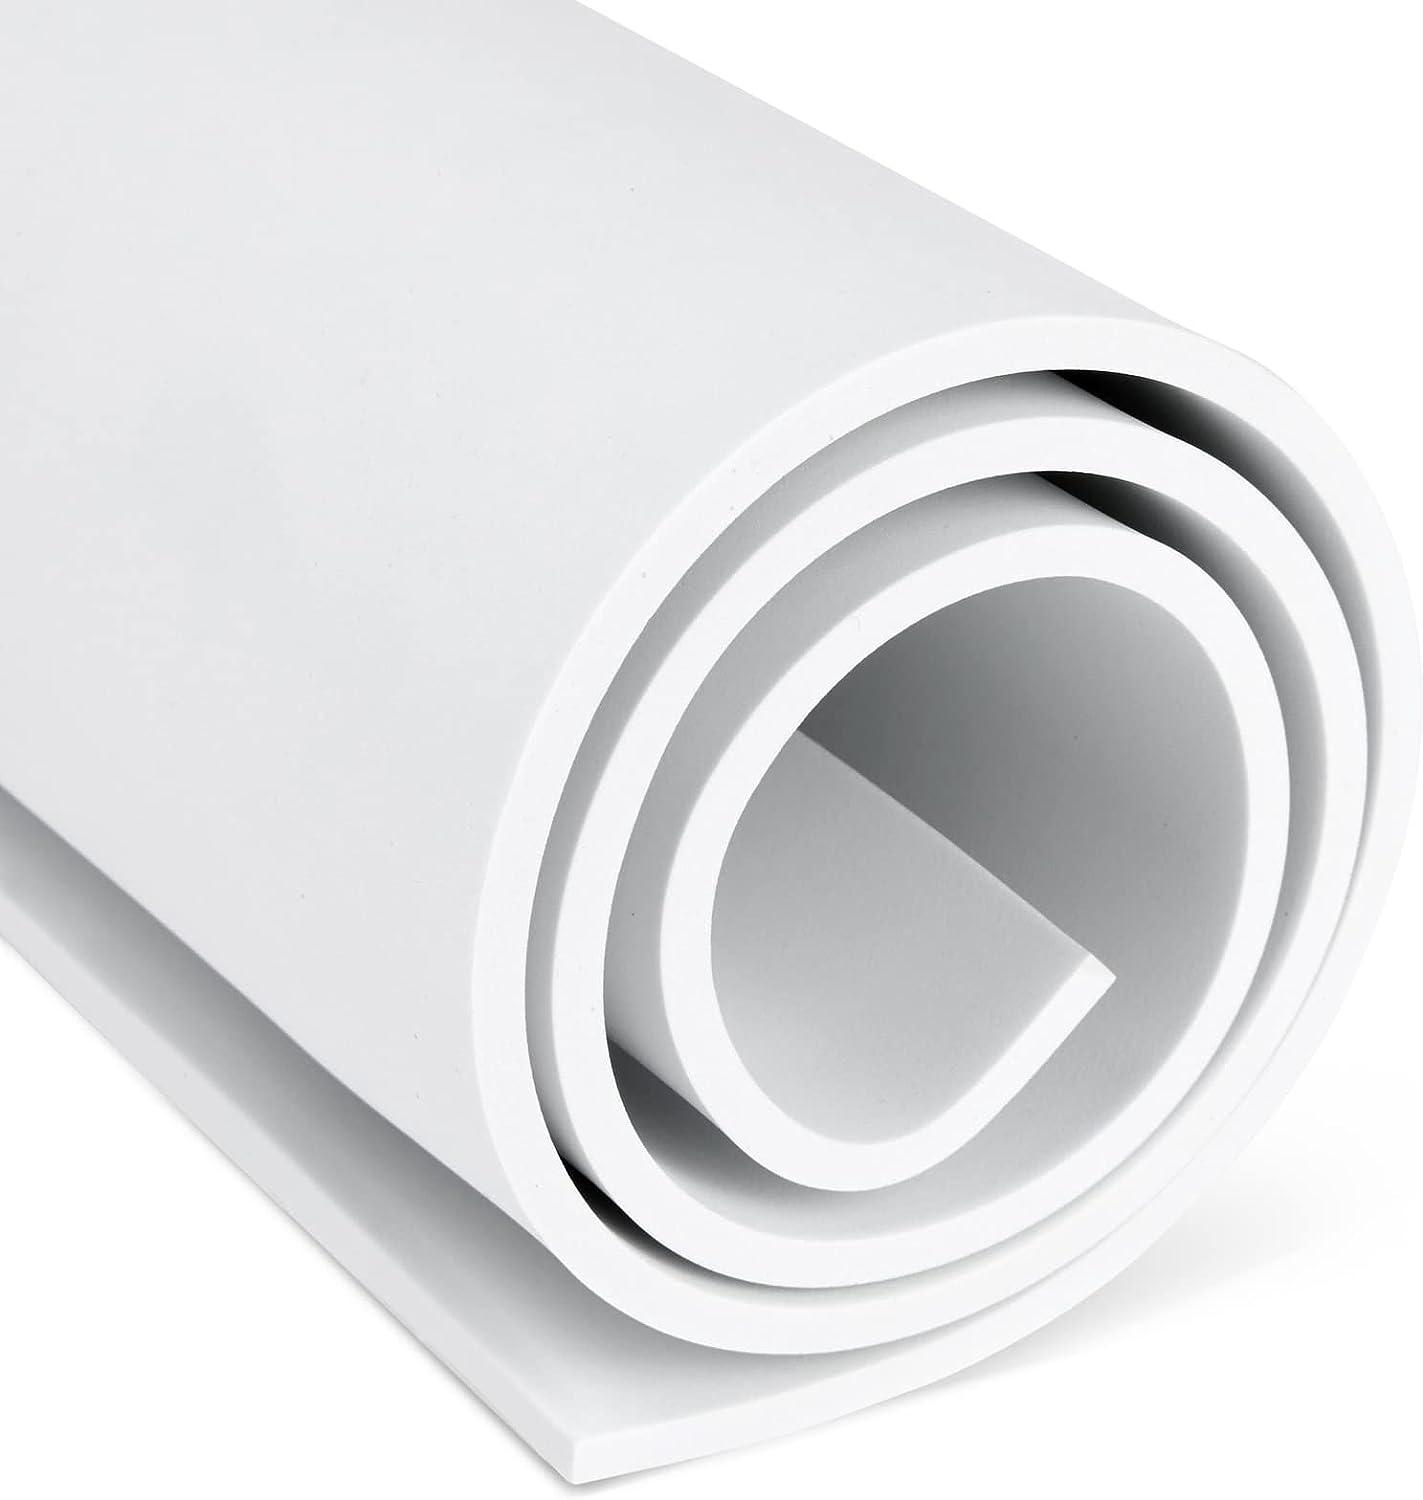 5mm EVA Foam Roll, White Foam Sheet for Cosplay Armor, Costumes, Party  Decorations, High Density 100 kg/m3 (14x39 In) 